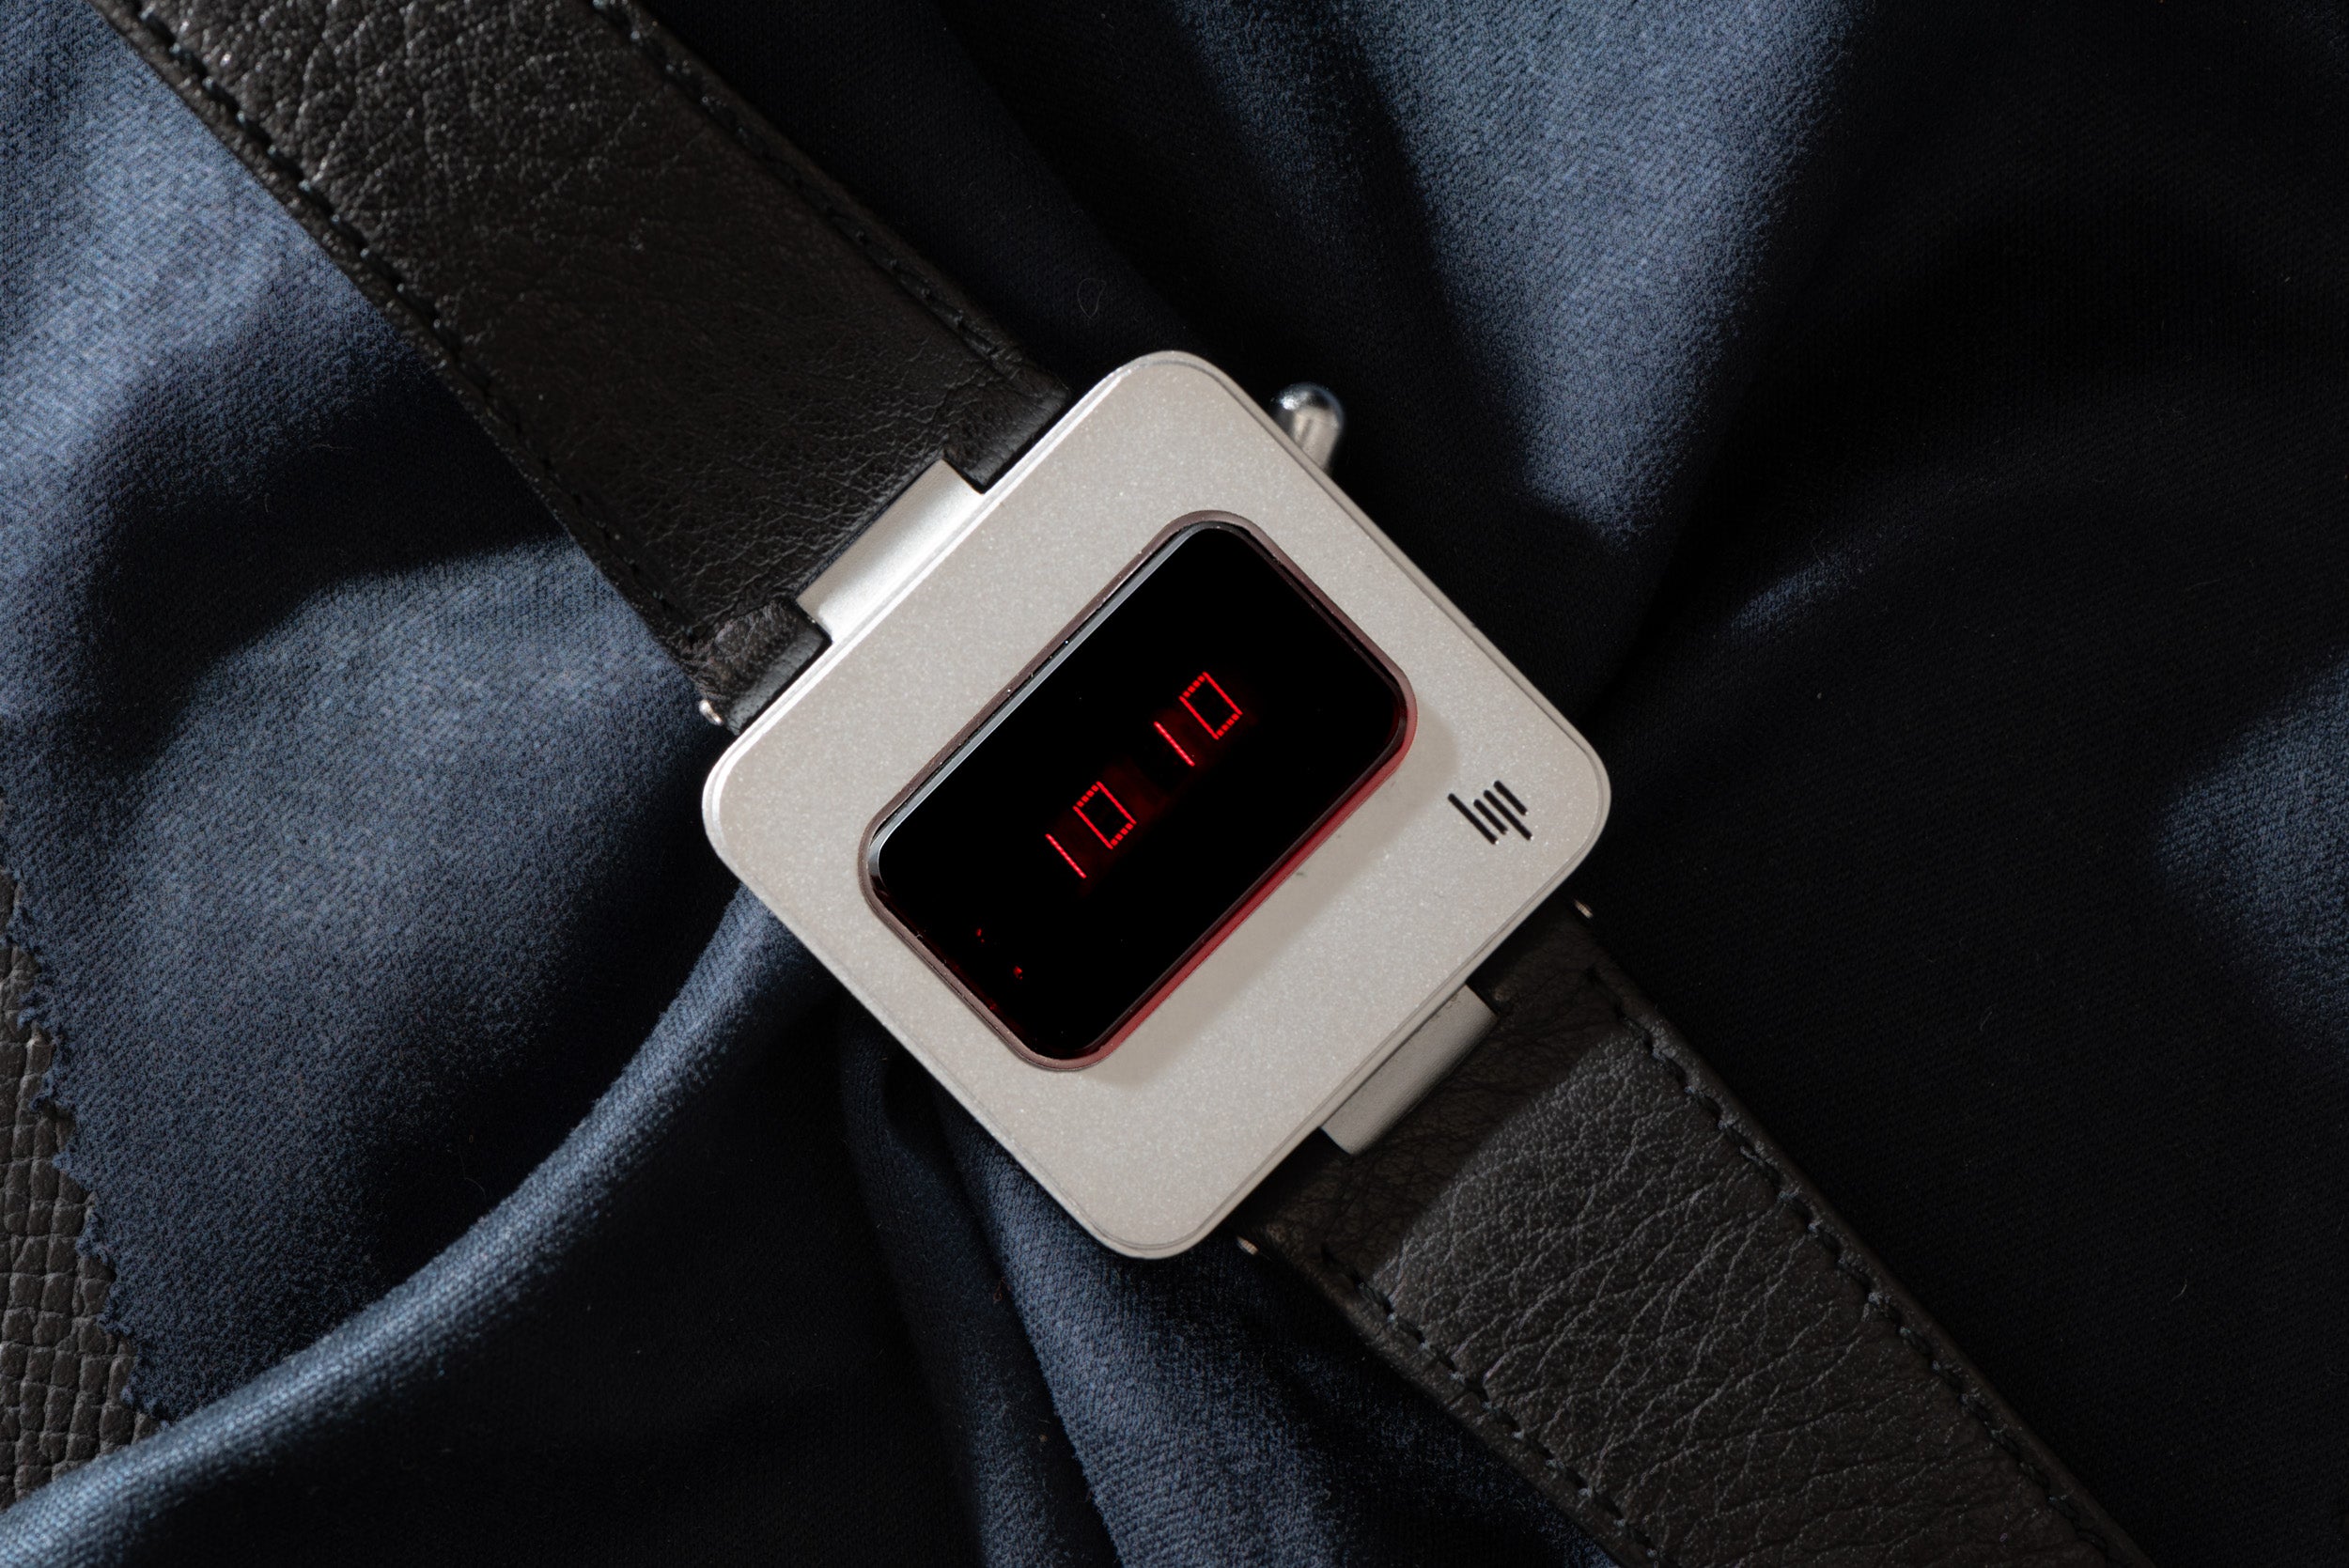 LIP 'Diode' LED Watch